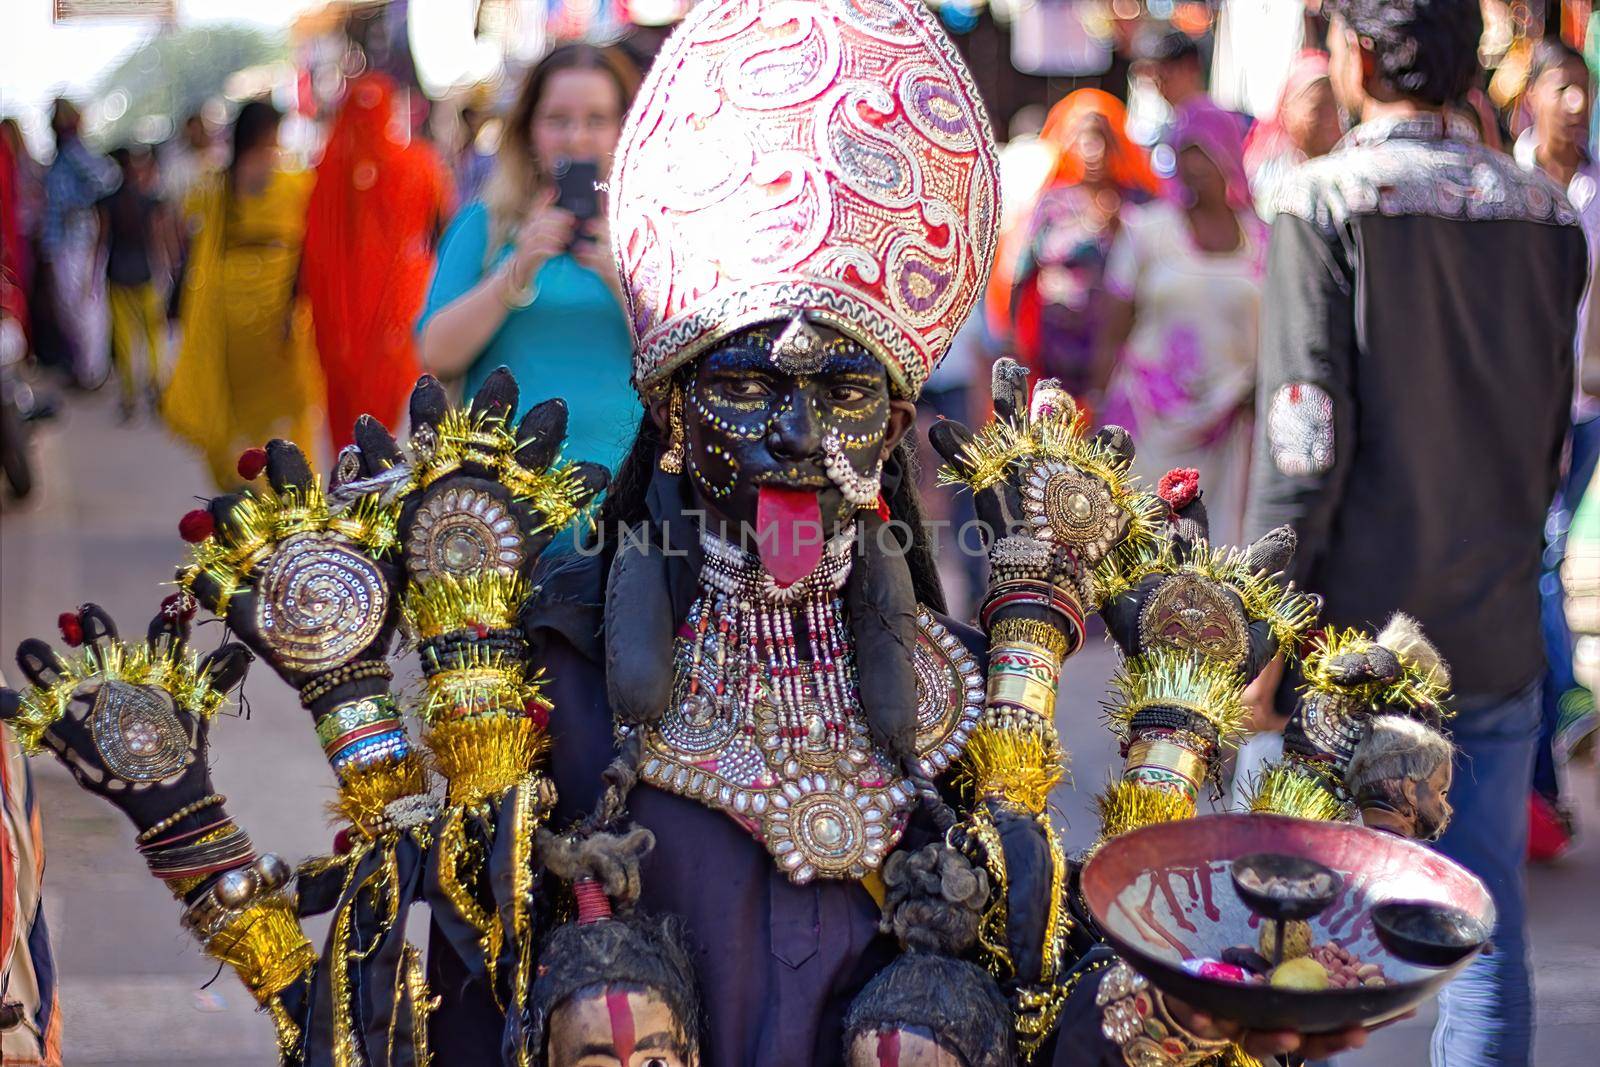 Pushkar, India - November 10, 2016: A young little girl dressed up or disguised as Indian goddess of destruction named maa Kali with crown and multiple hands as street performer during Pushkar fair by arpanbhatia